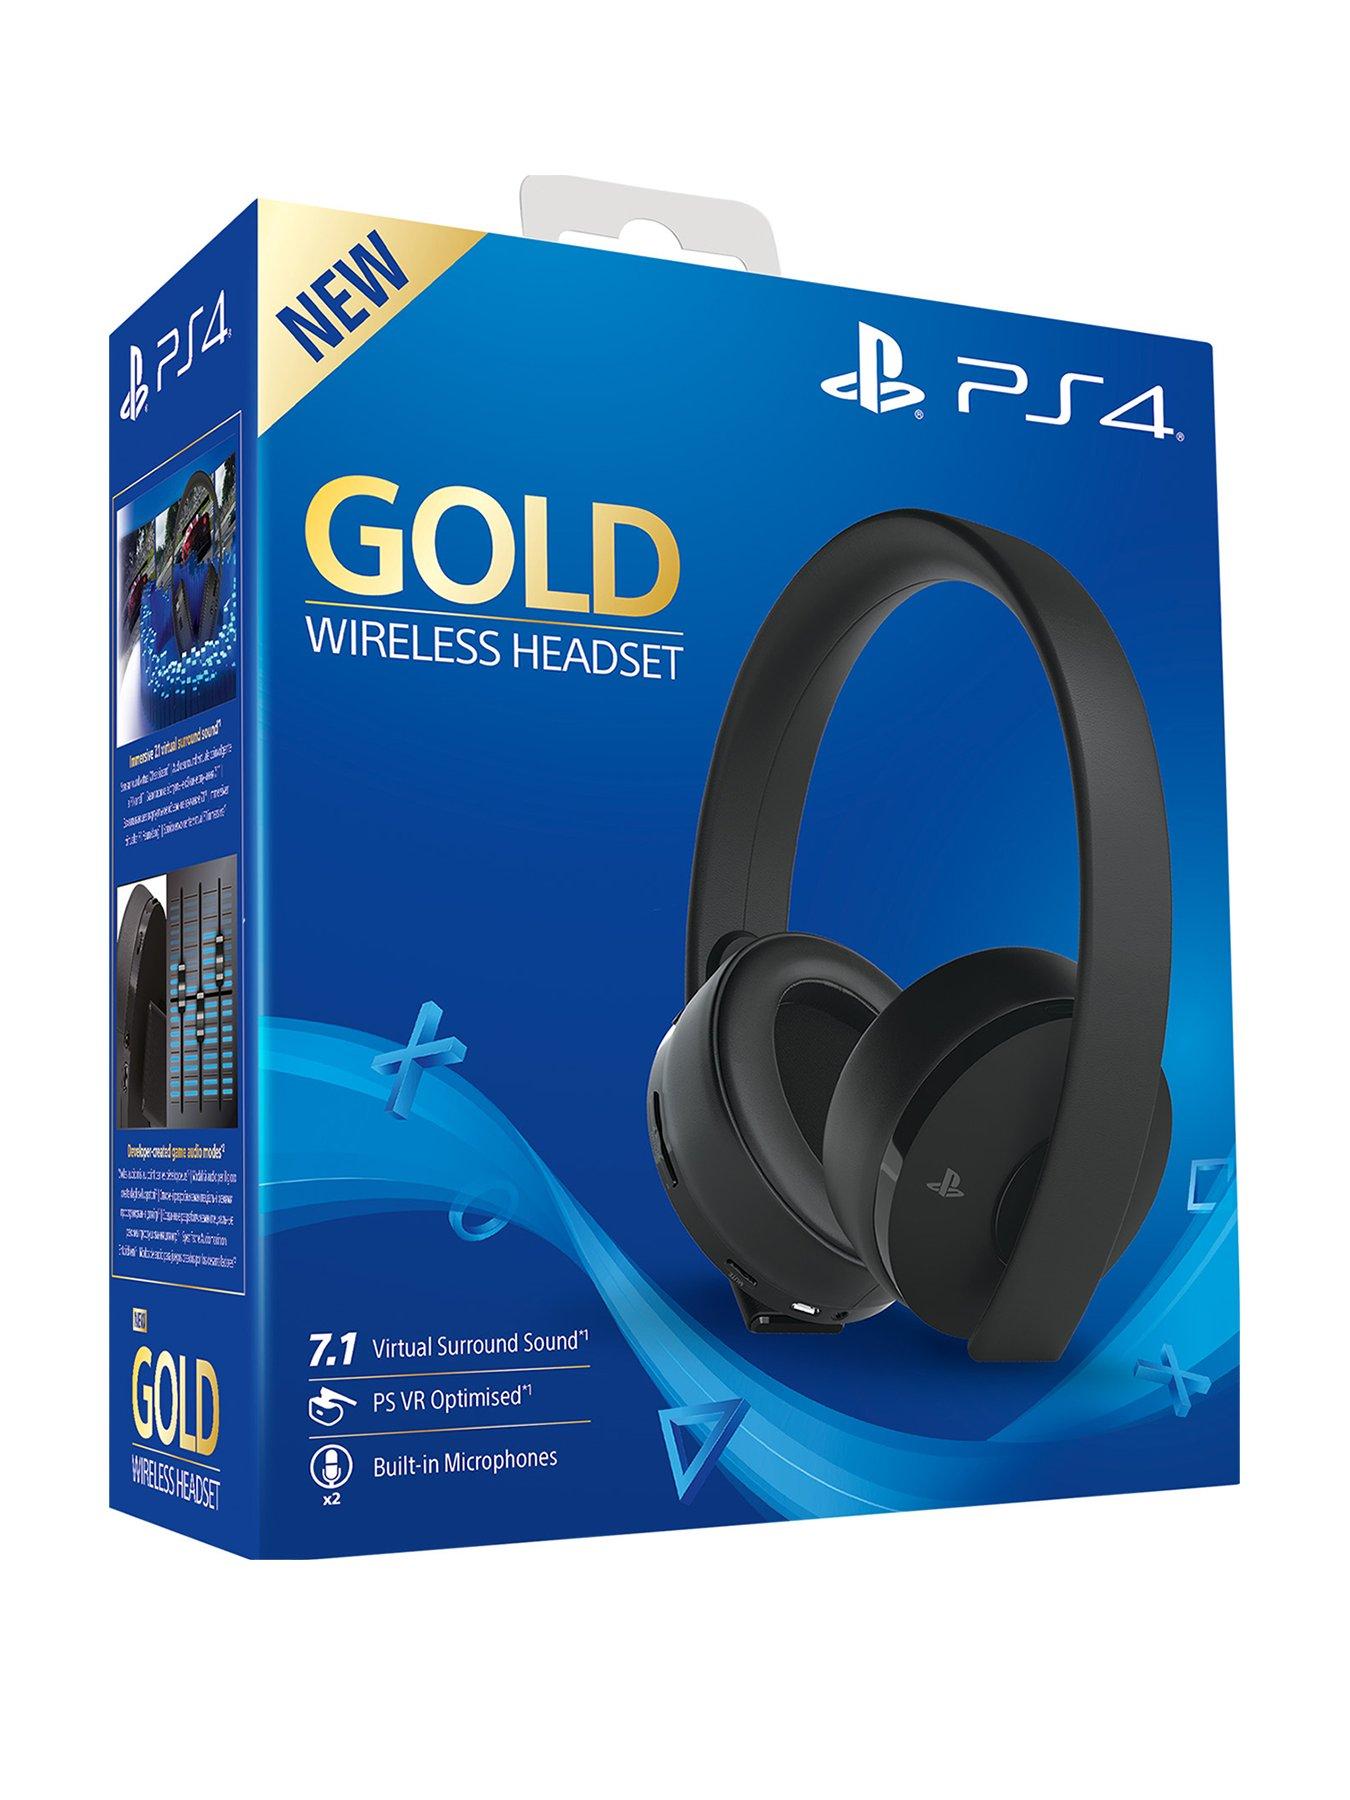 ps4 gold headset pairing